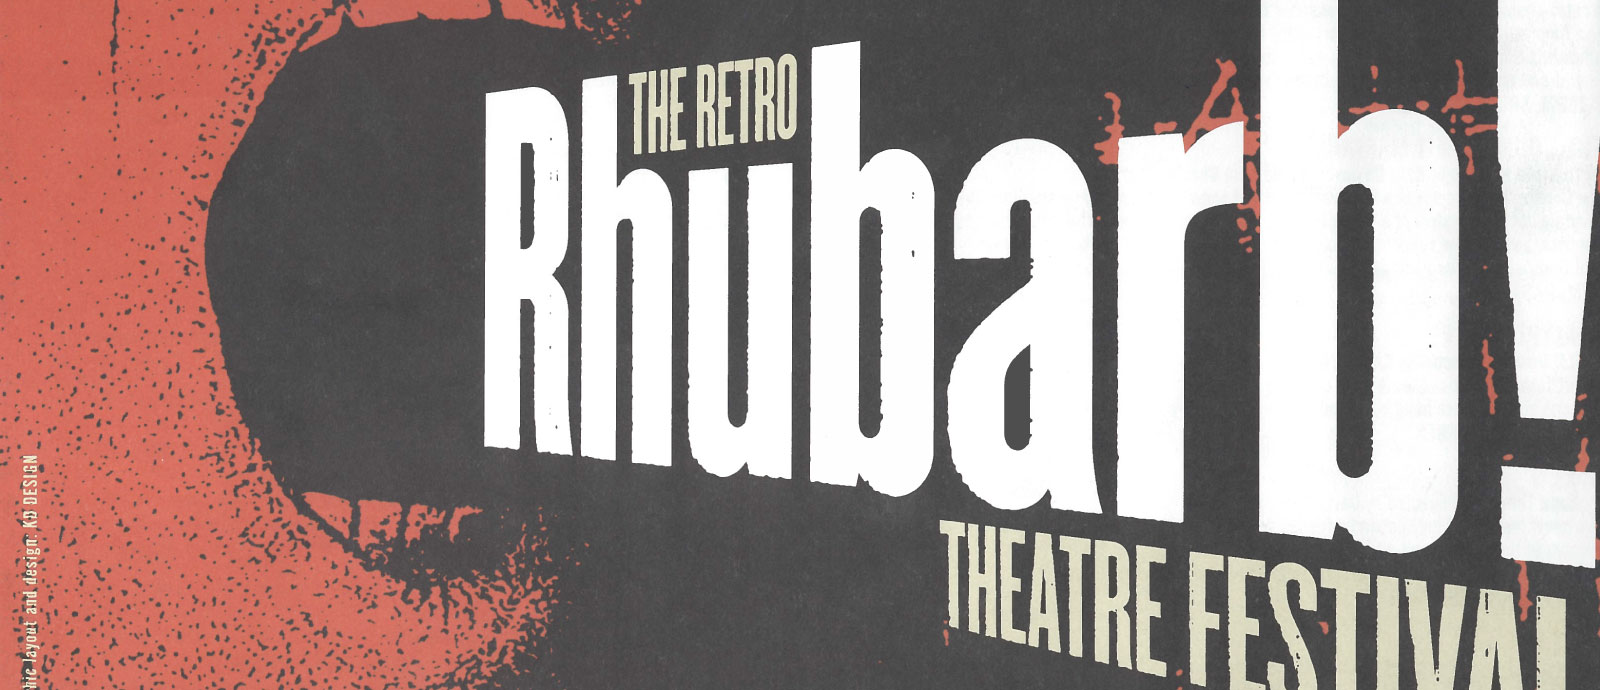 Elvira Grey Fable Porn - THE RHUBARB ARCHIVE - Buddies in Bad Times TheatreBuddies in ...